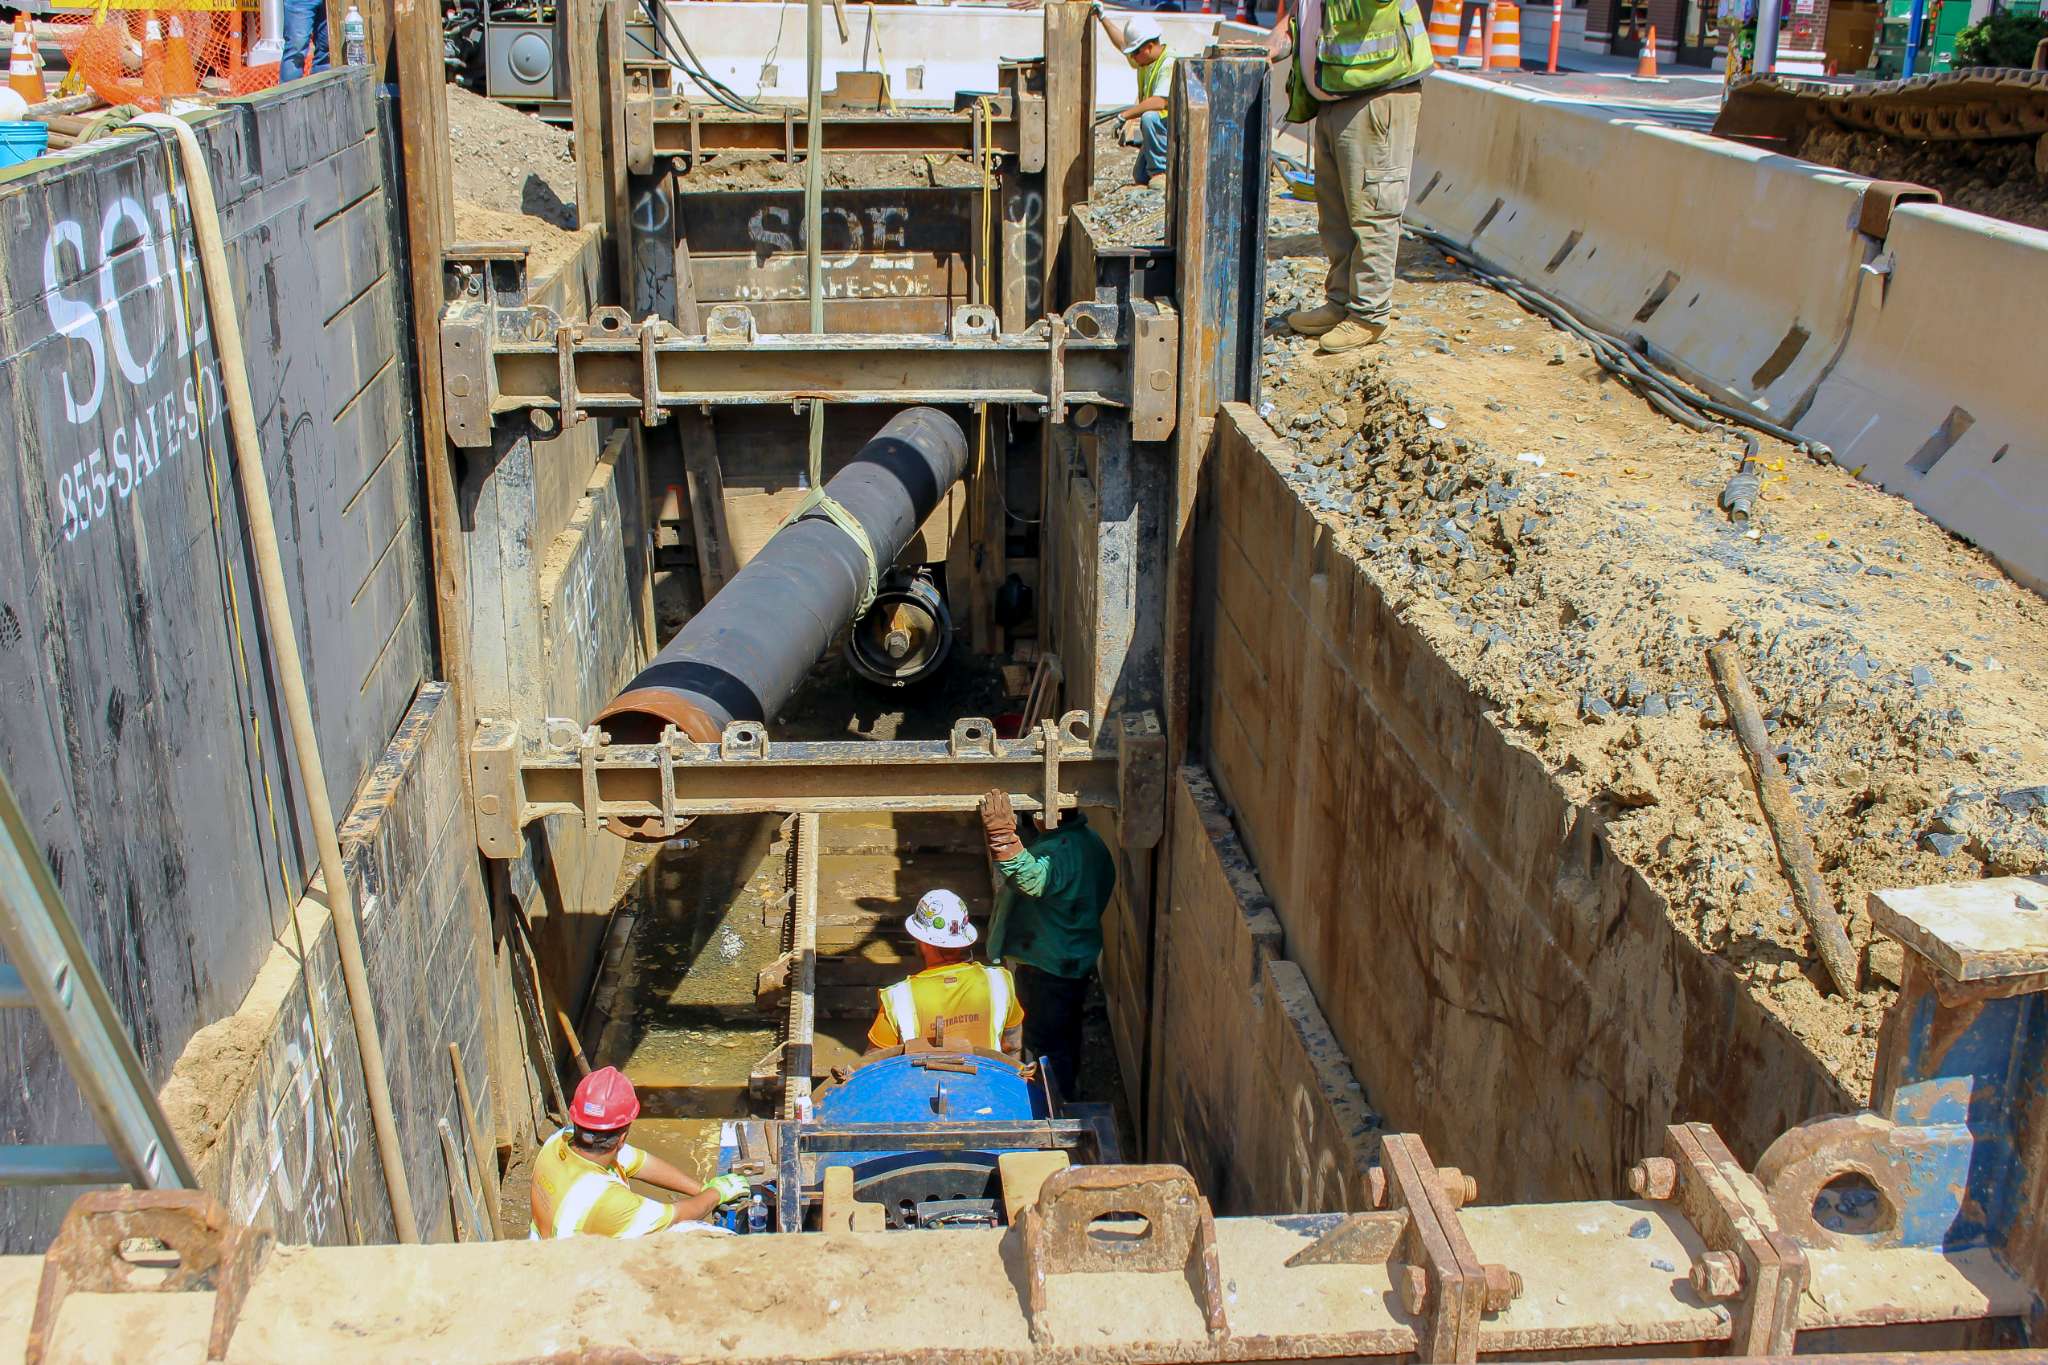 Hackensack Sewer Separation and Main Street Conversion